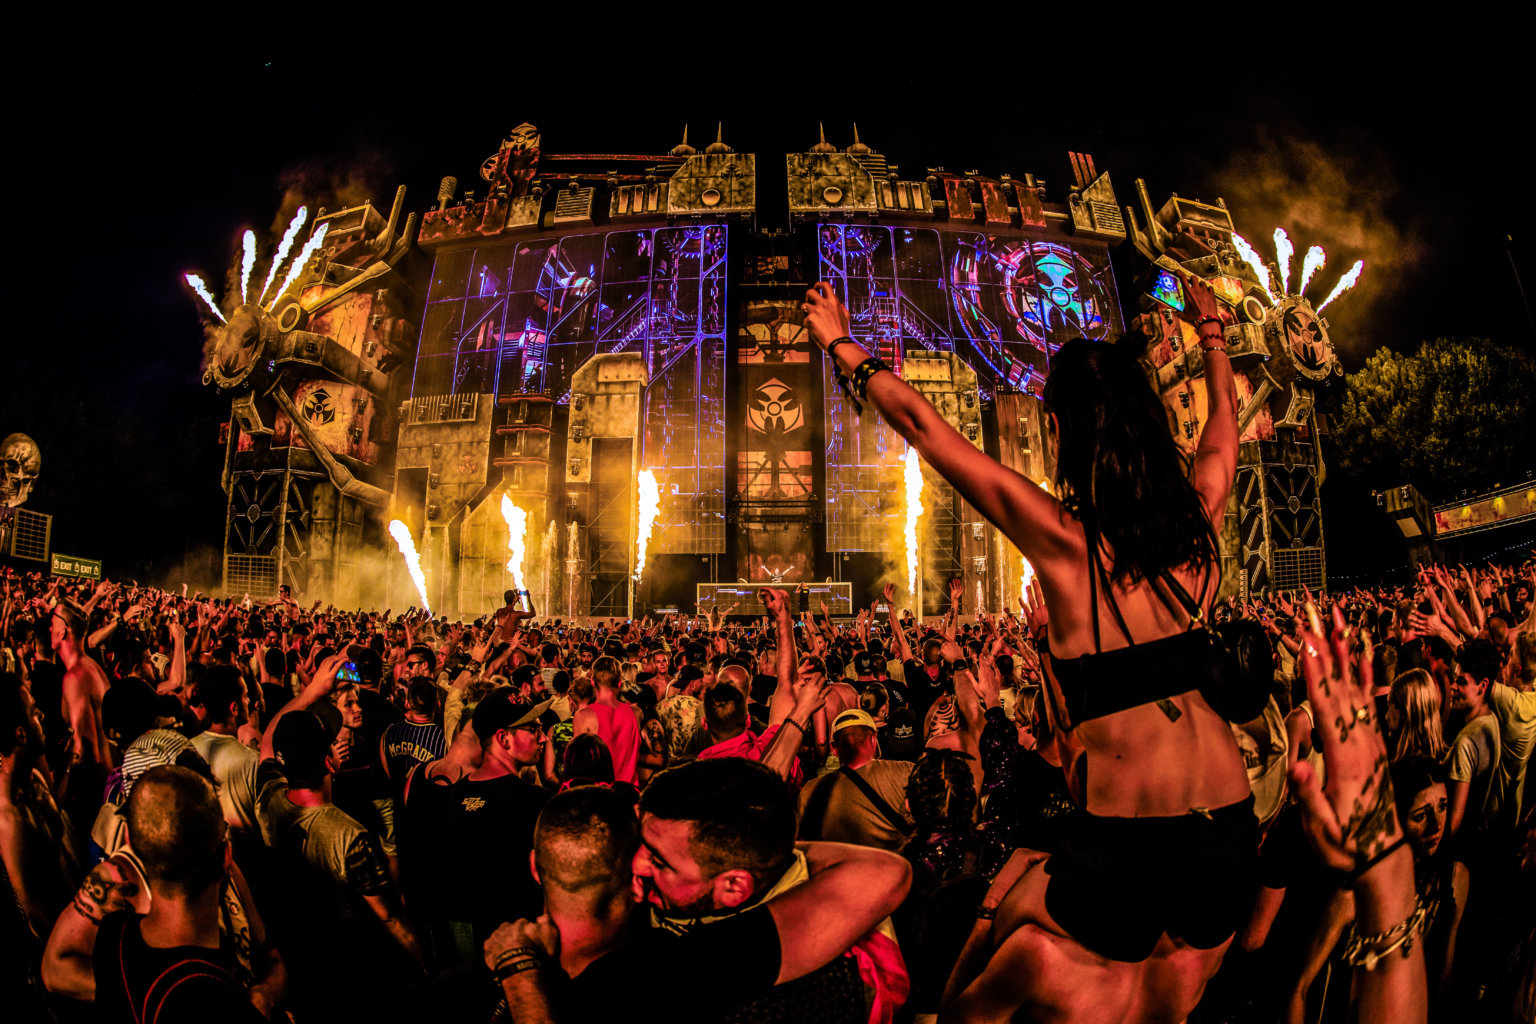 Read the final info for Dominator 2019 here!